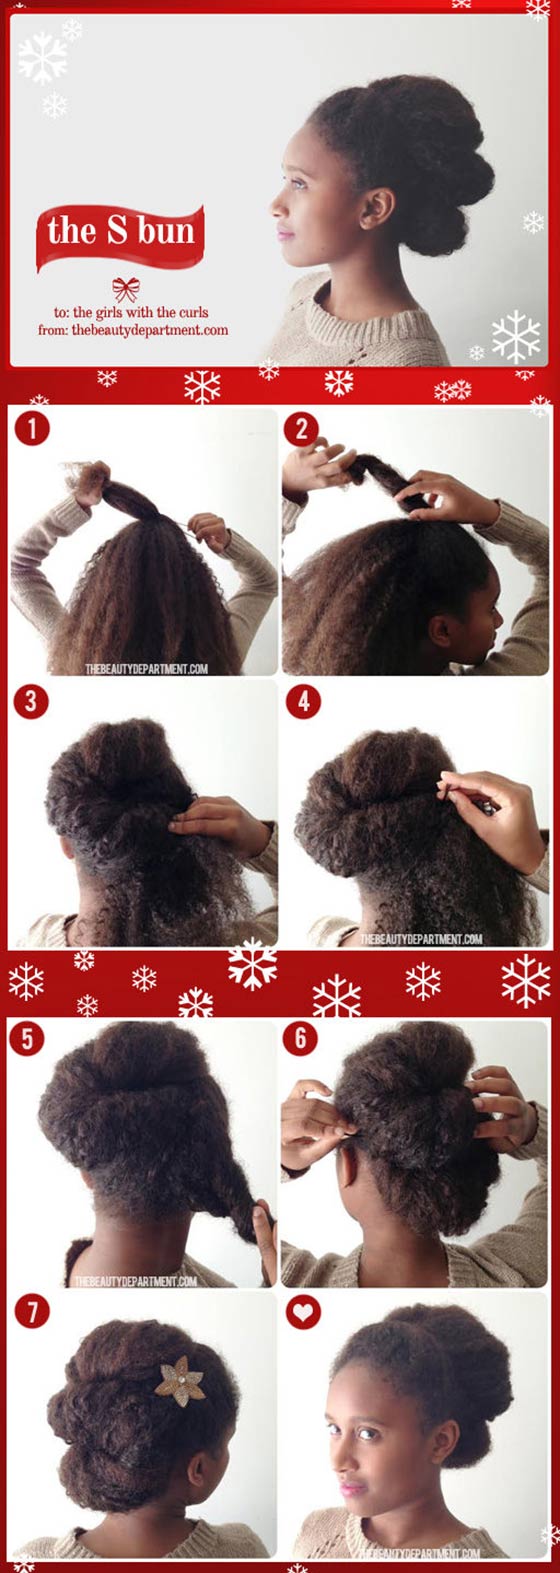 The S bun short hairstyle for black women